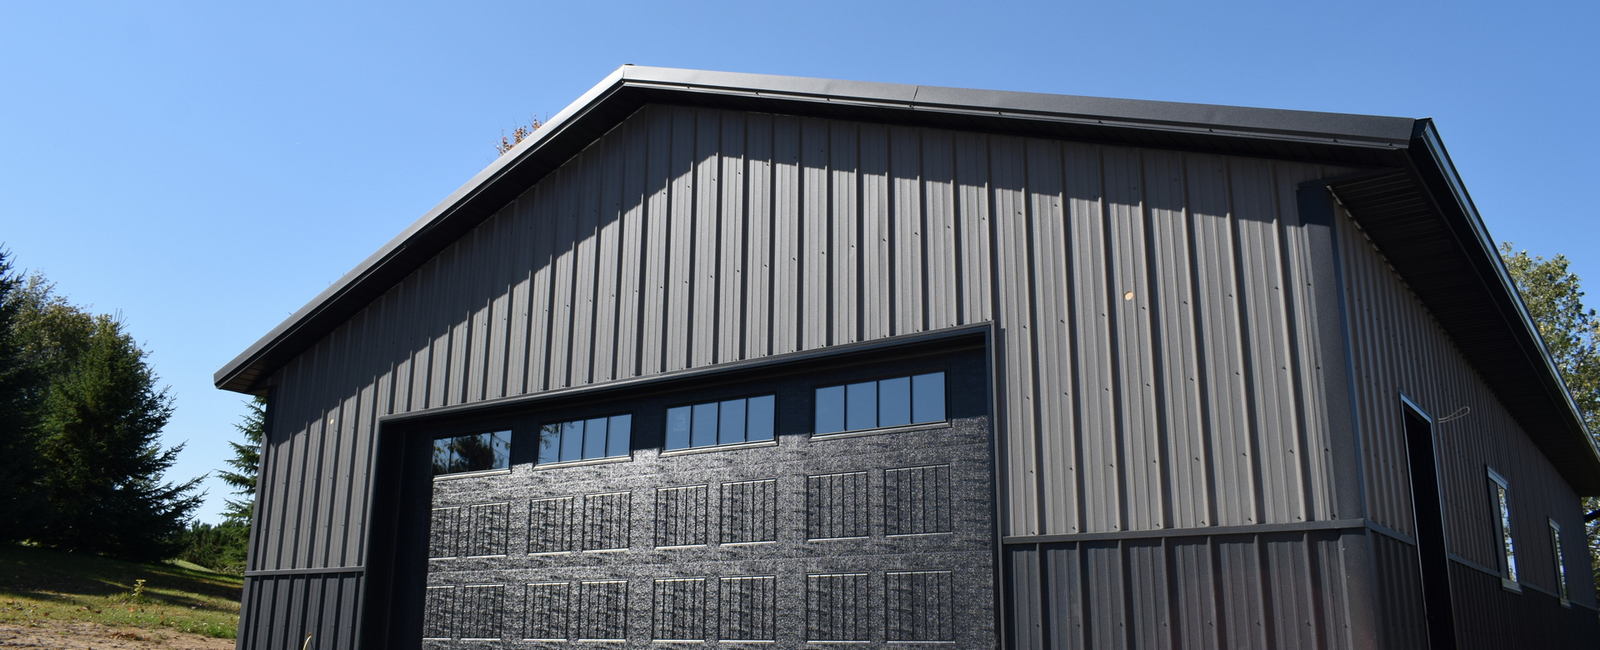 Steel Roofing Siding Panels All, Corrugated Metal Roofing Menards